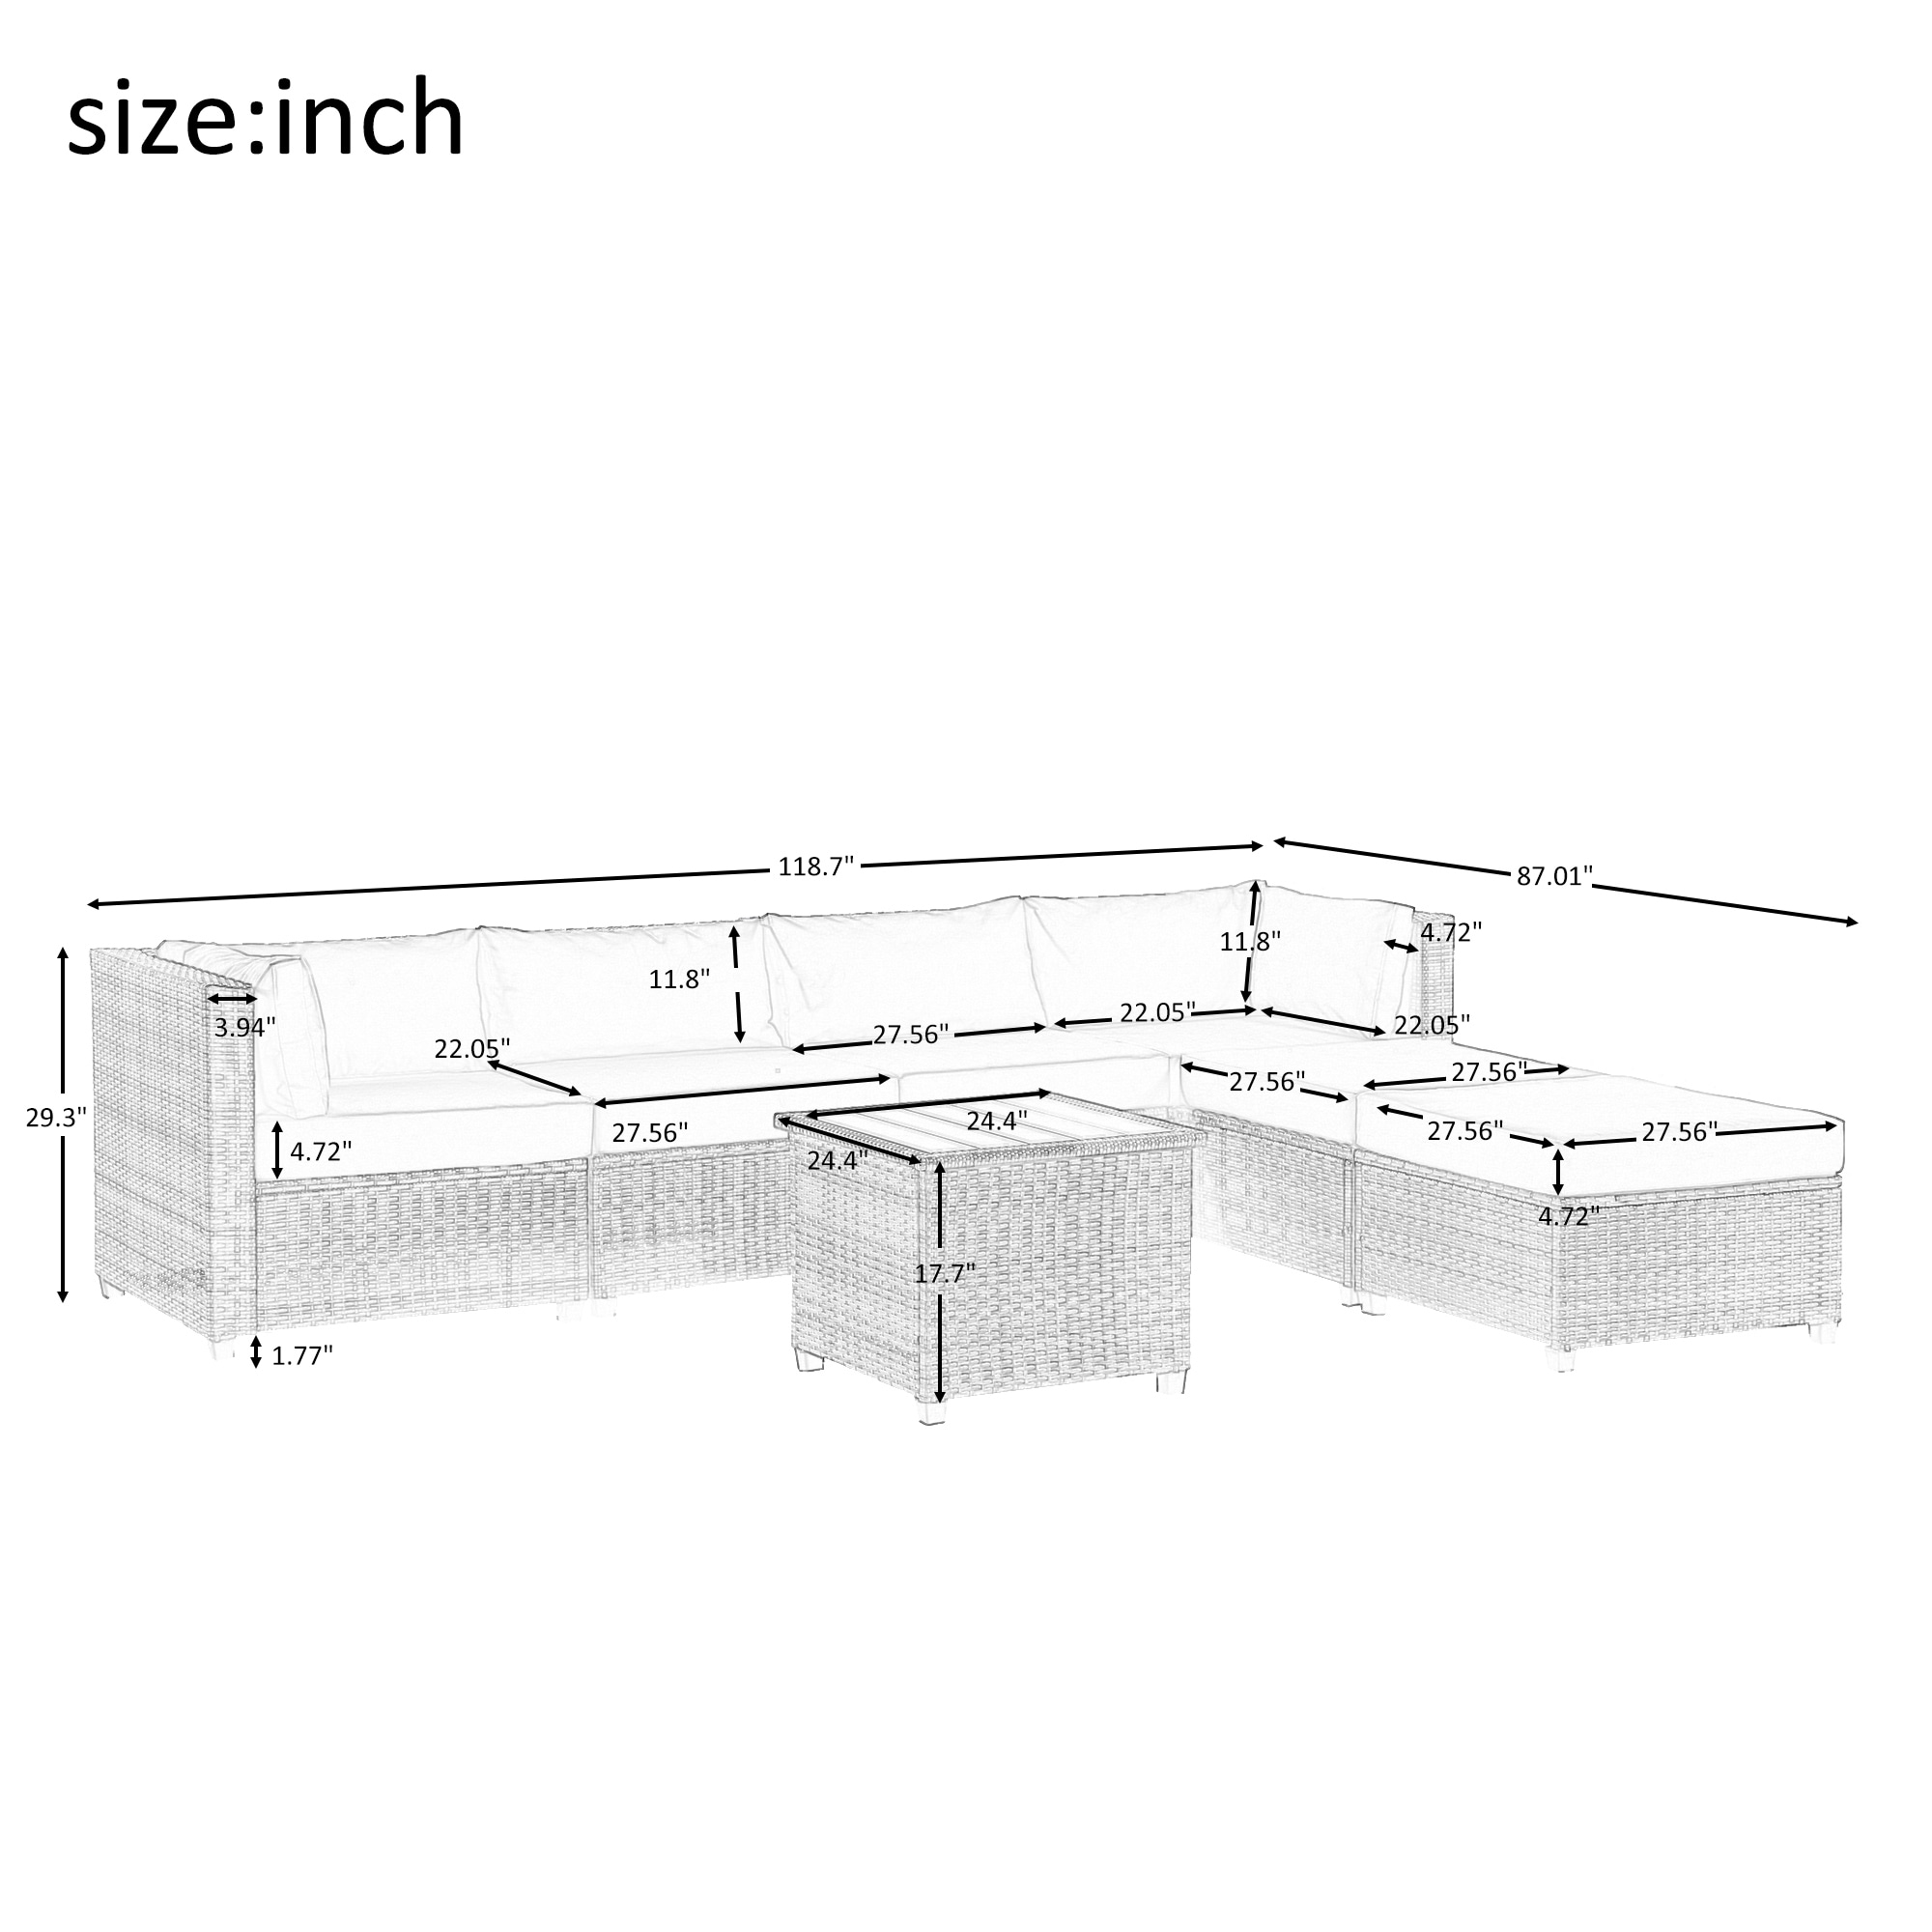 7 Piece Rattan Sectional Seating Group